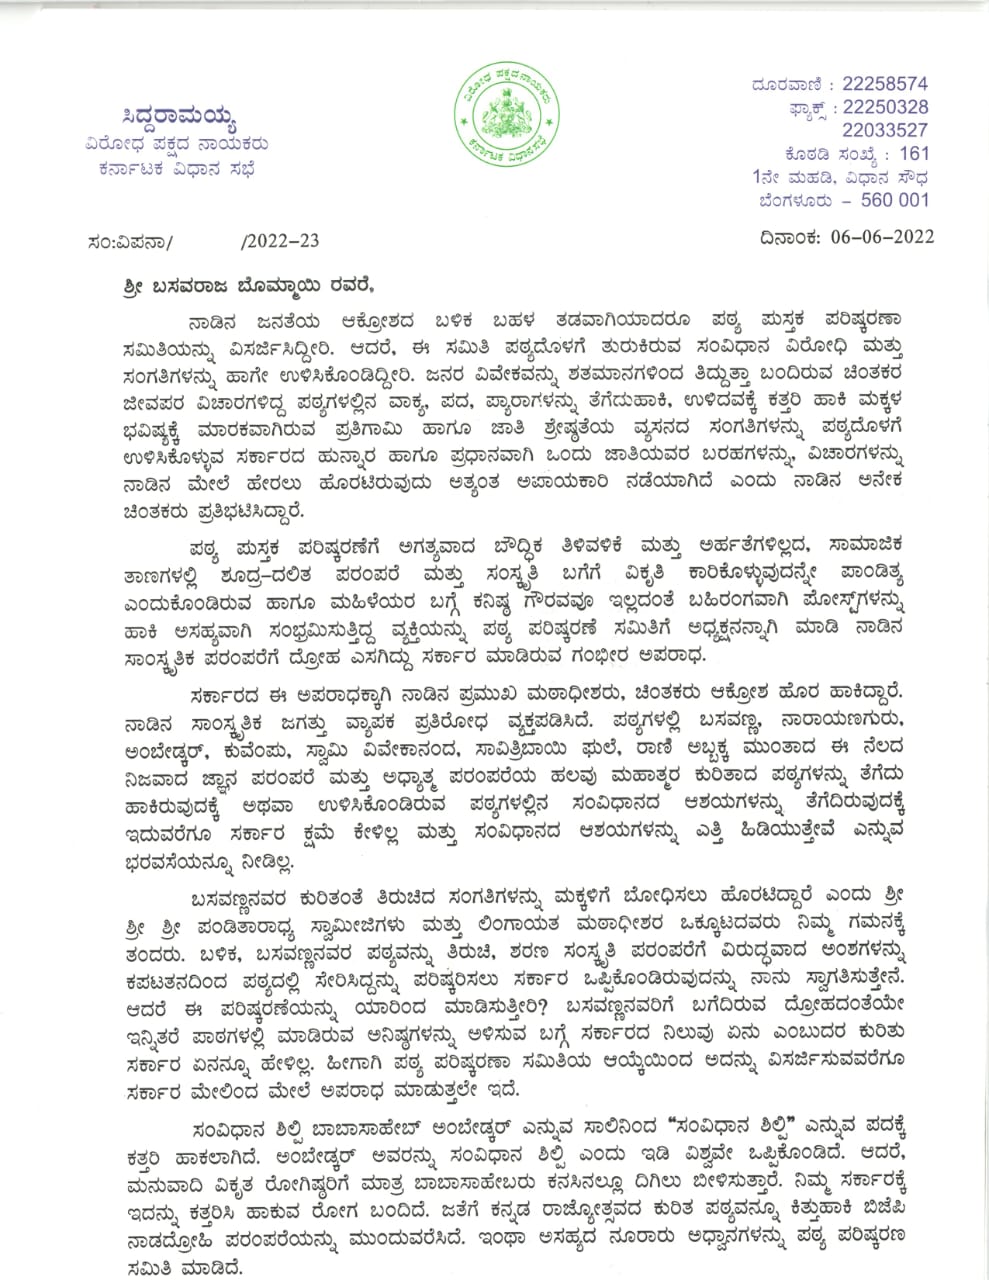 Siddaramaiah wrote a letter to CM to correct the textbook problem